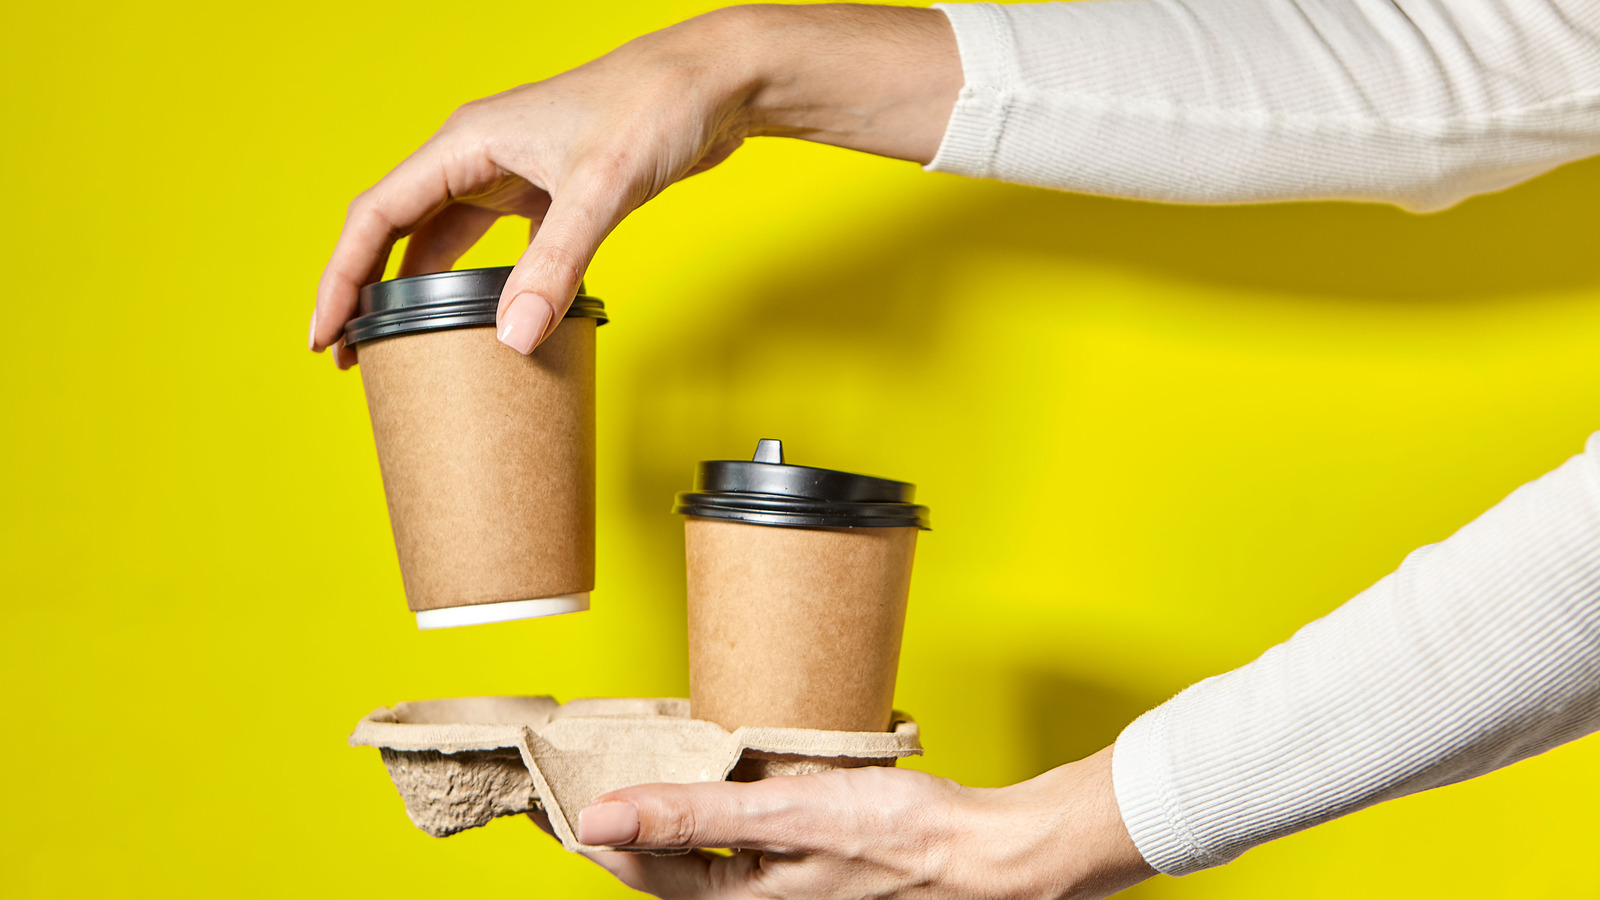 REUSABLE COFFEE CUPS ARE STILL NOT ACCEPTED IN MANY COFFEE CHAINS 